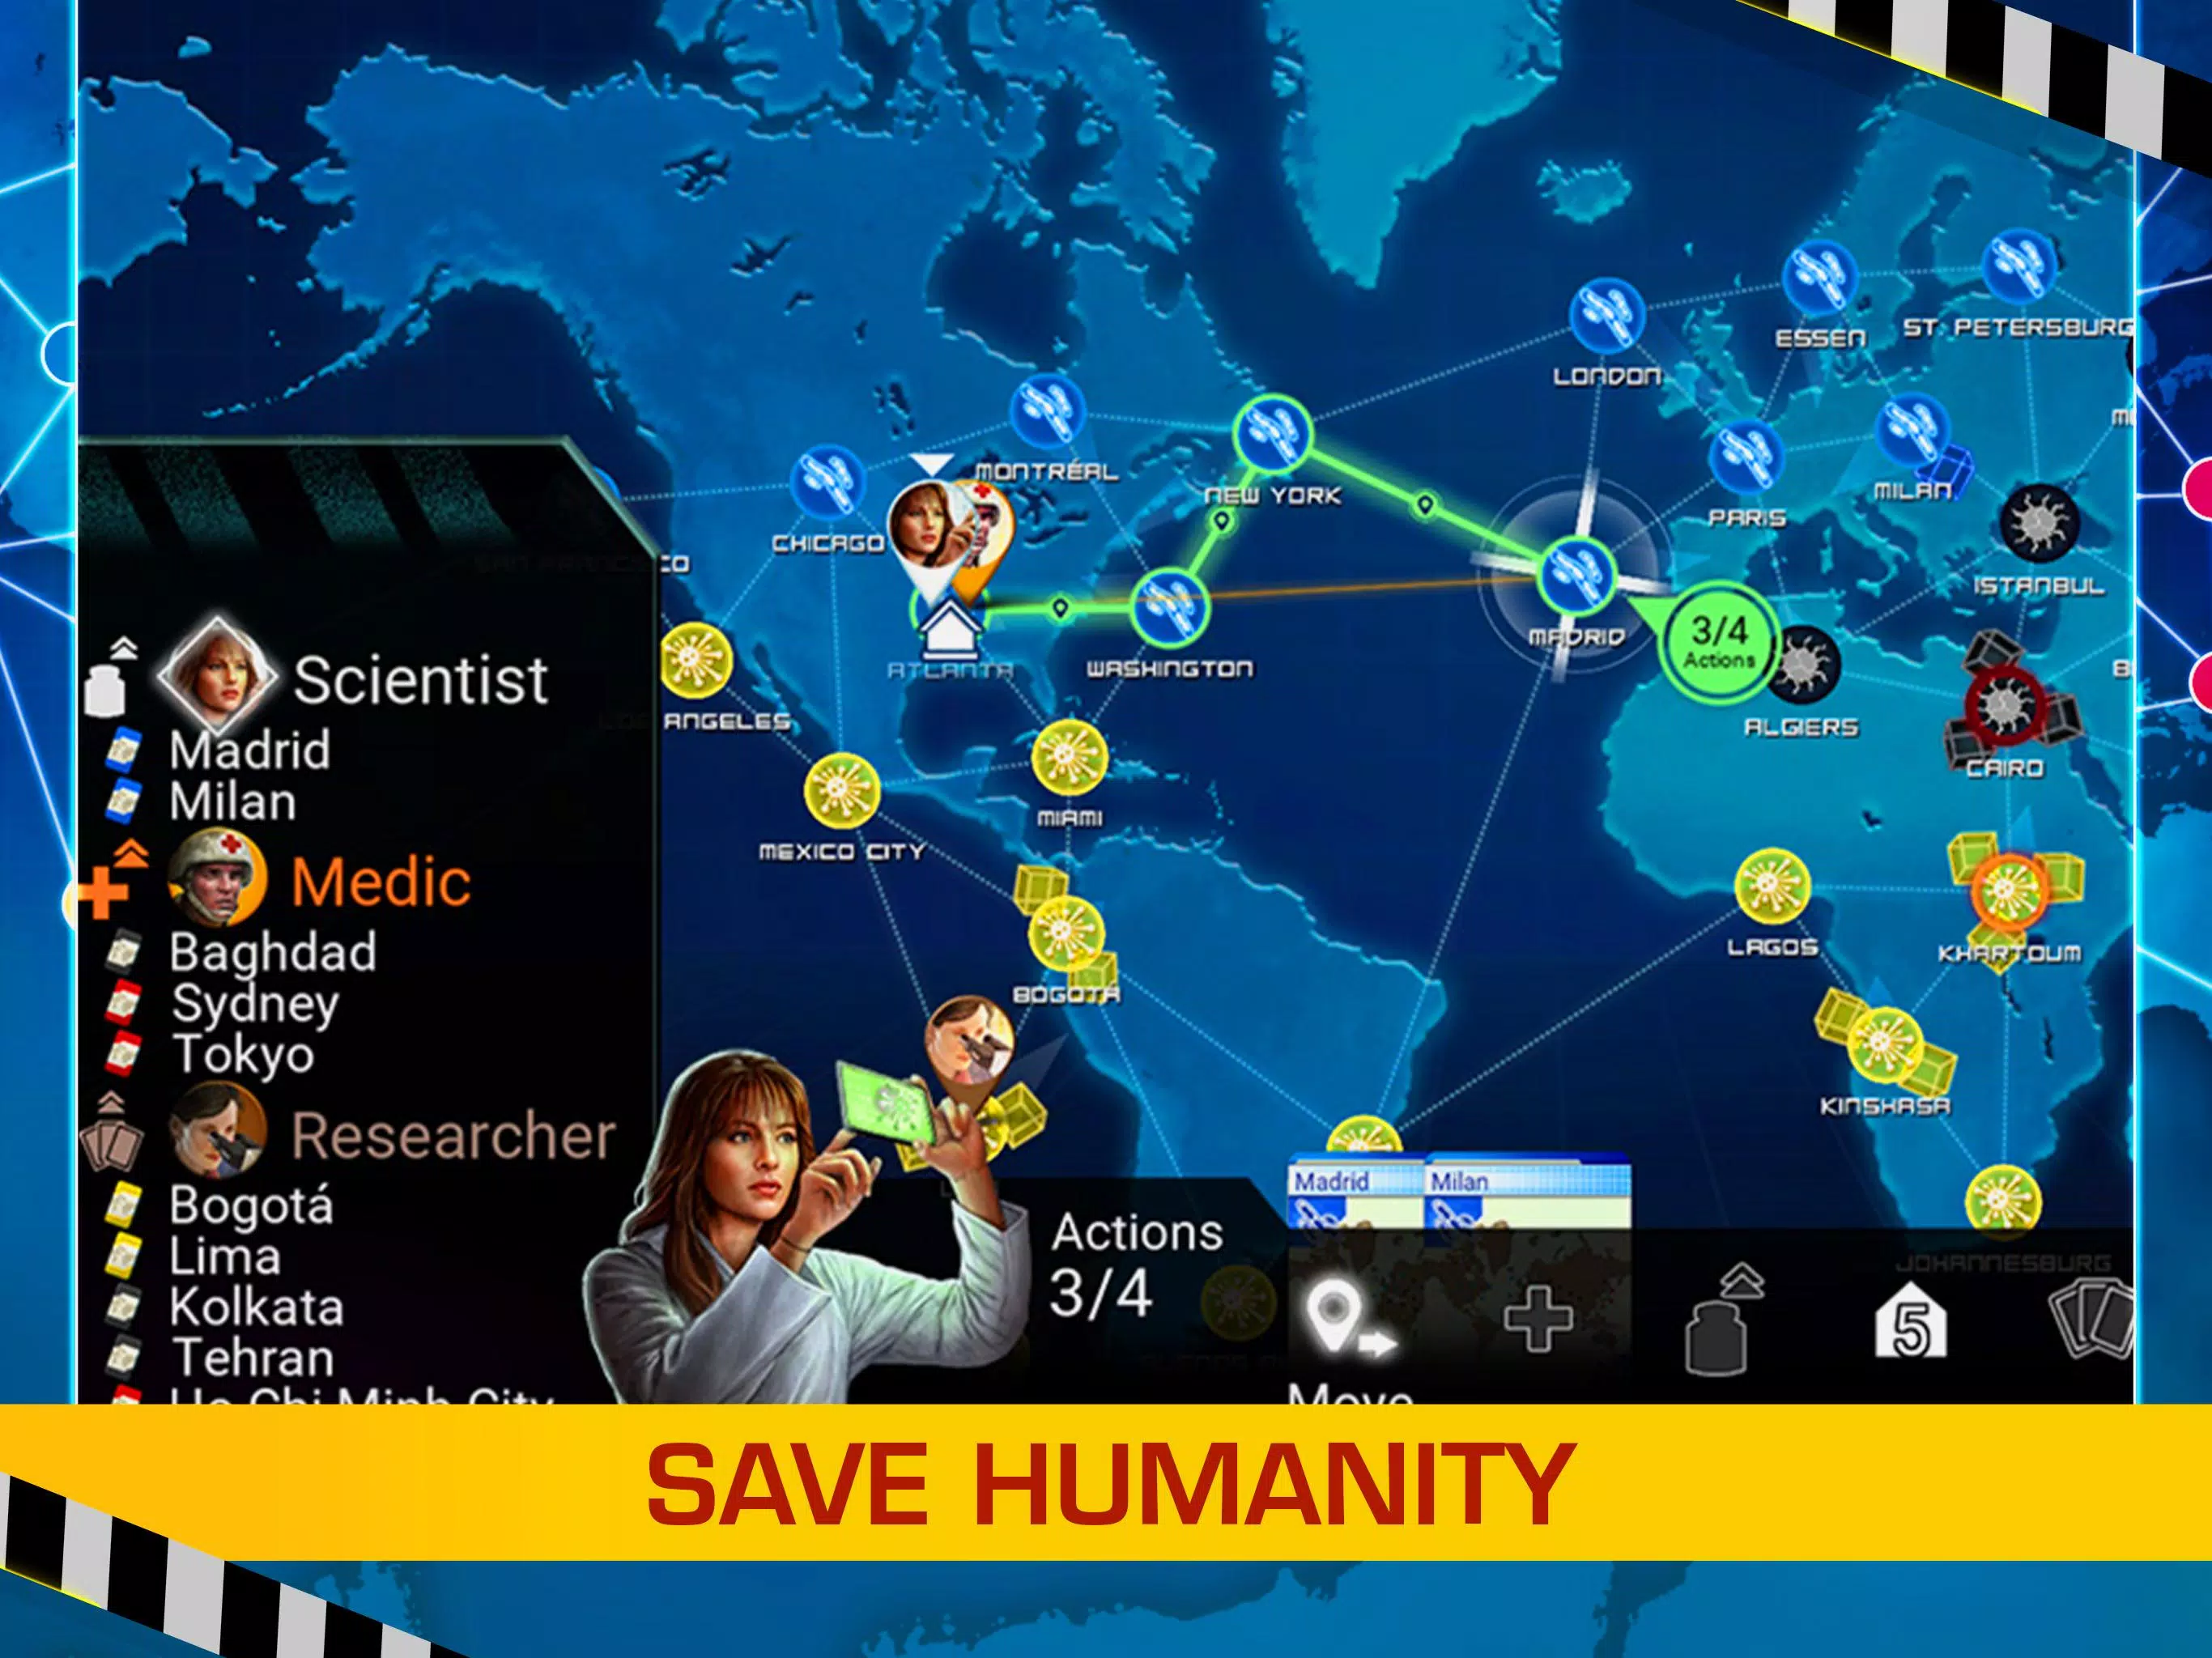 Pandemic: The Board Game Latest Version 2.2.12-65889938-a8e7a43b for Android